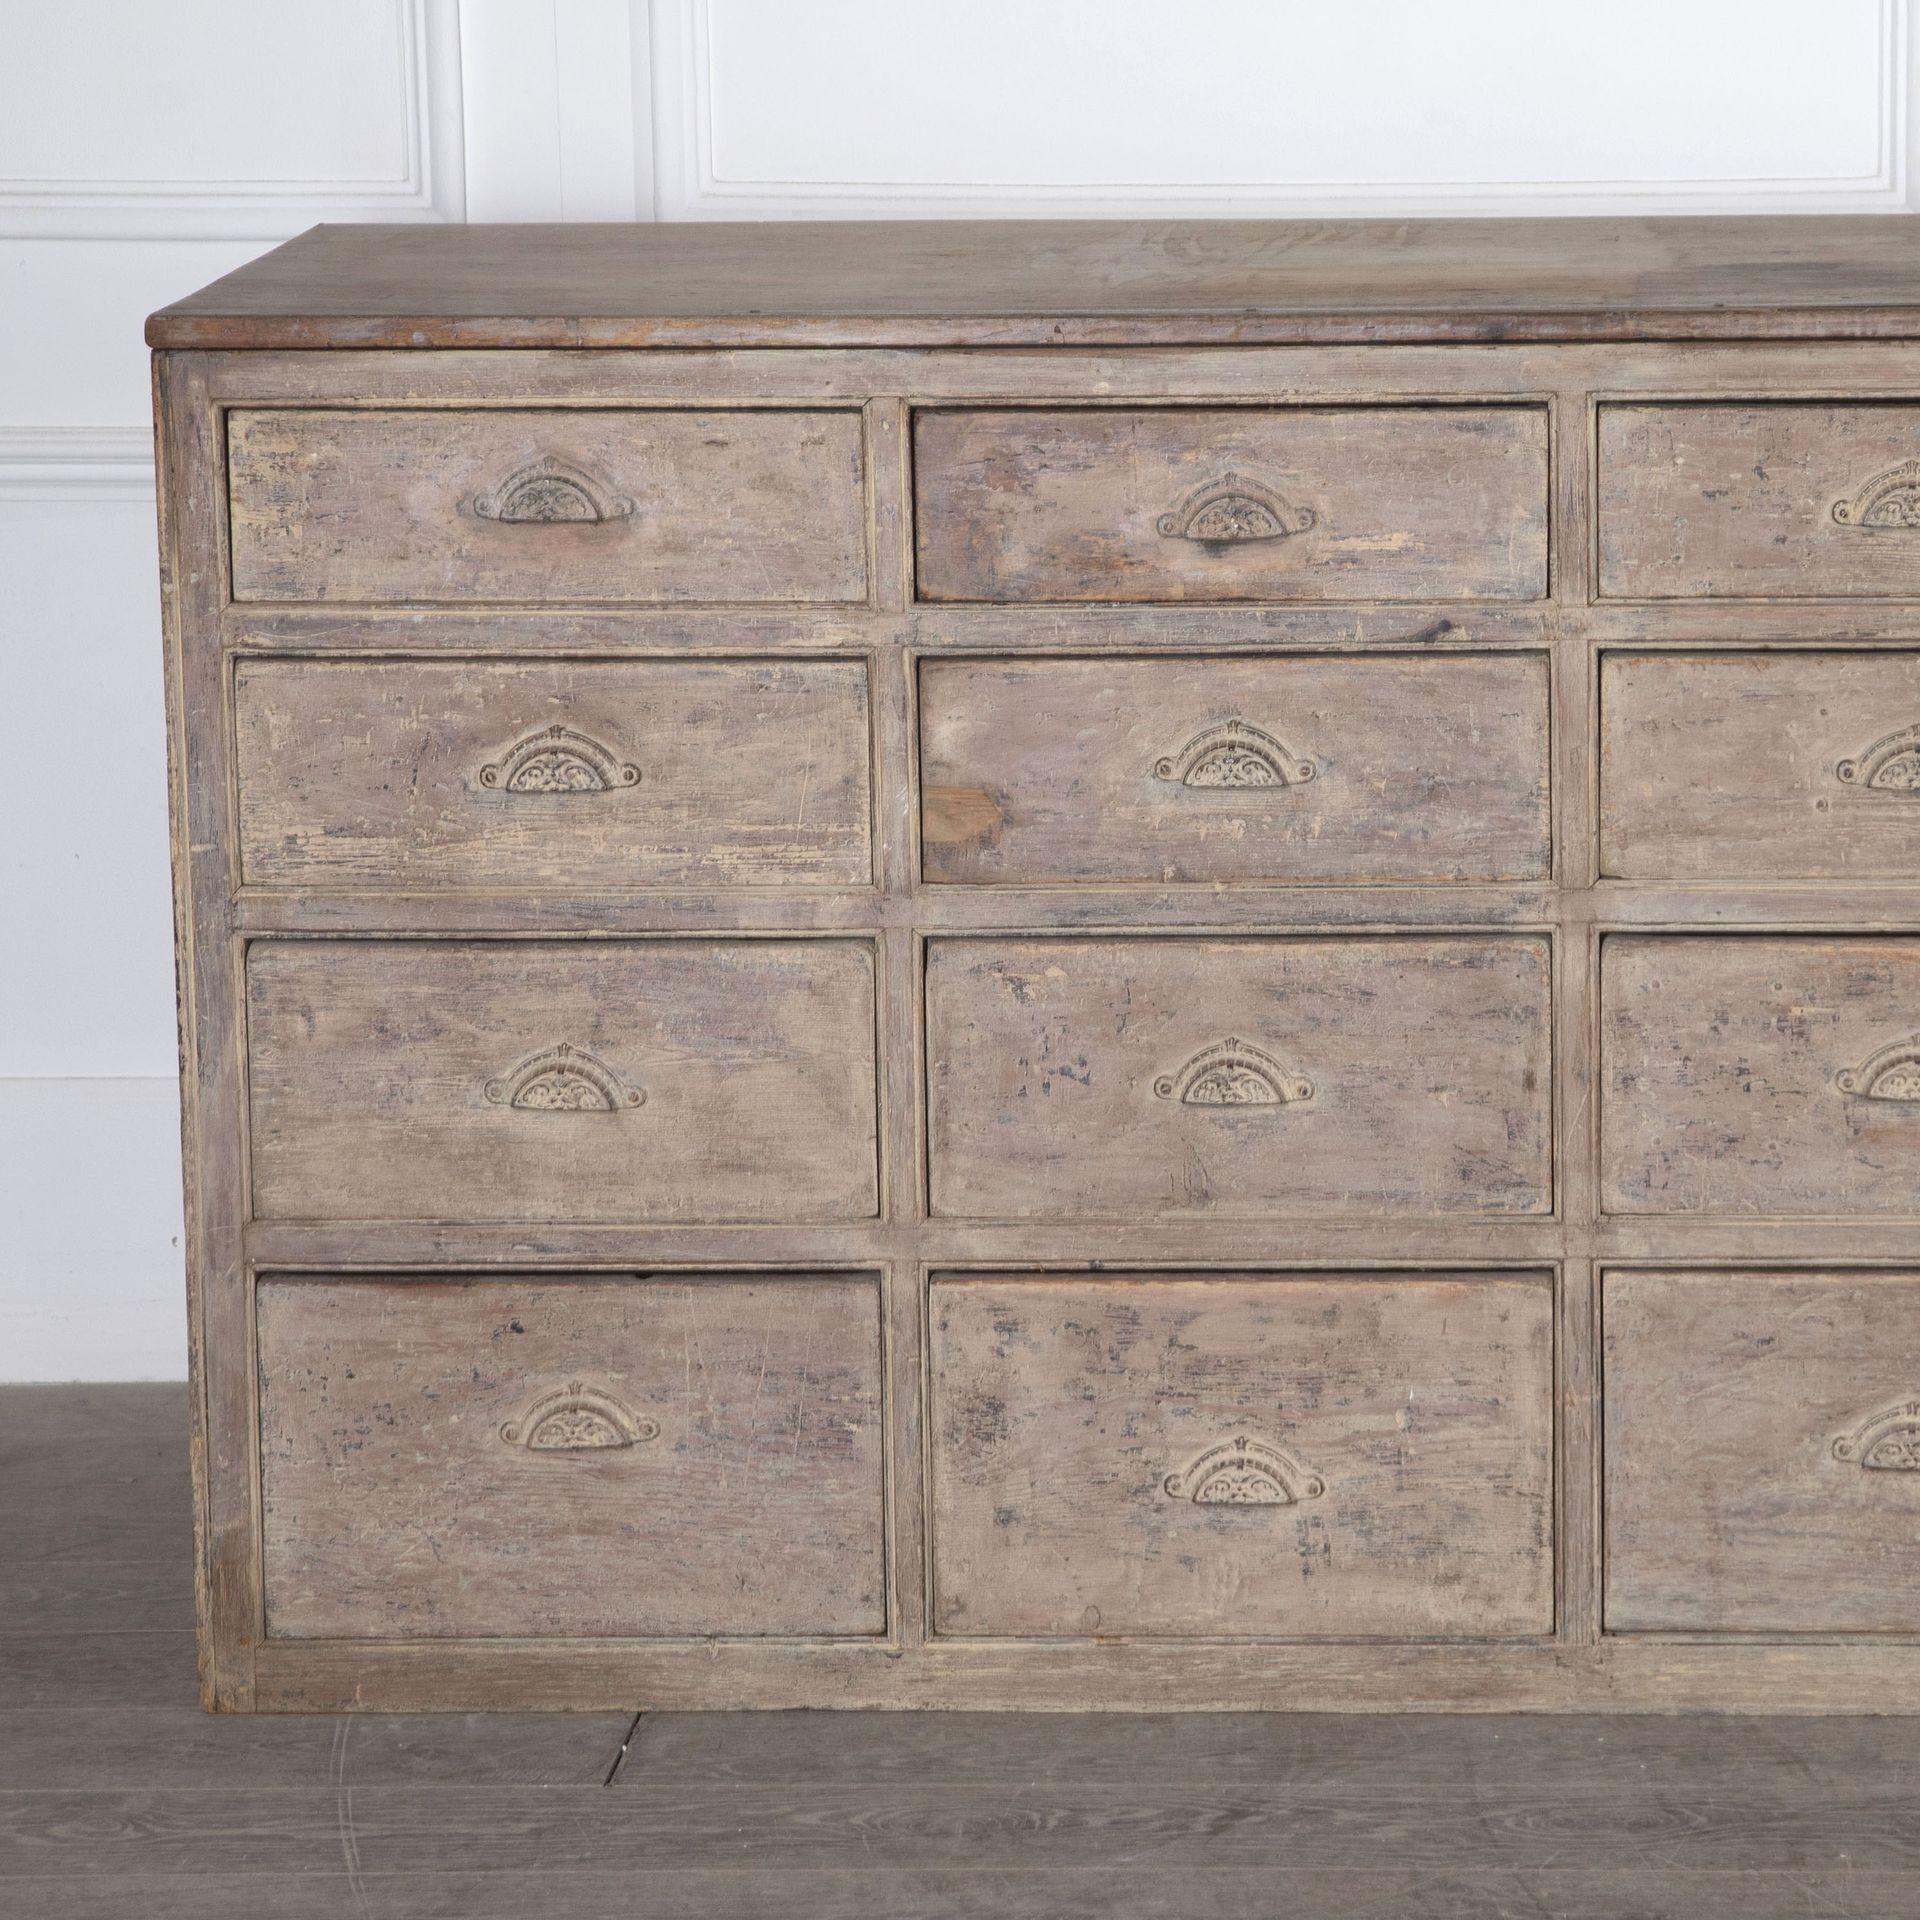 Late 19th Century bank of drawers in two bays, each bay comprising four columns of four drawers each.
The second row of drawers from the base run on small metal roller wheels fitted to the drawer runner rails.
There is a circular mark to the top at